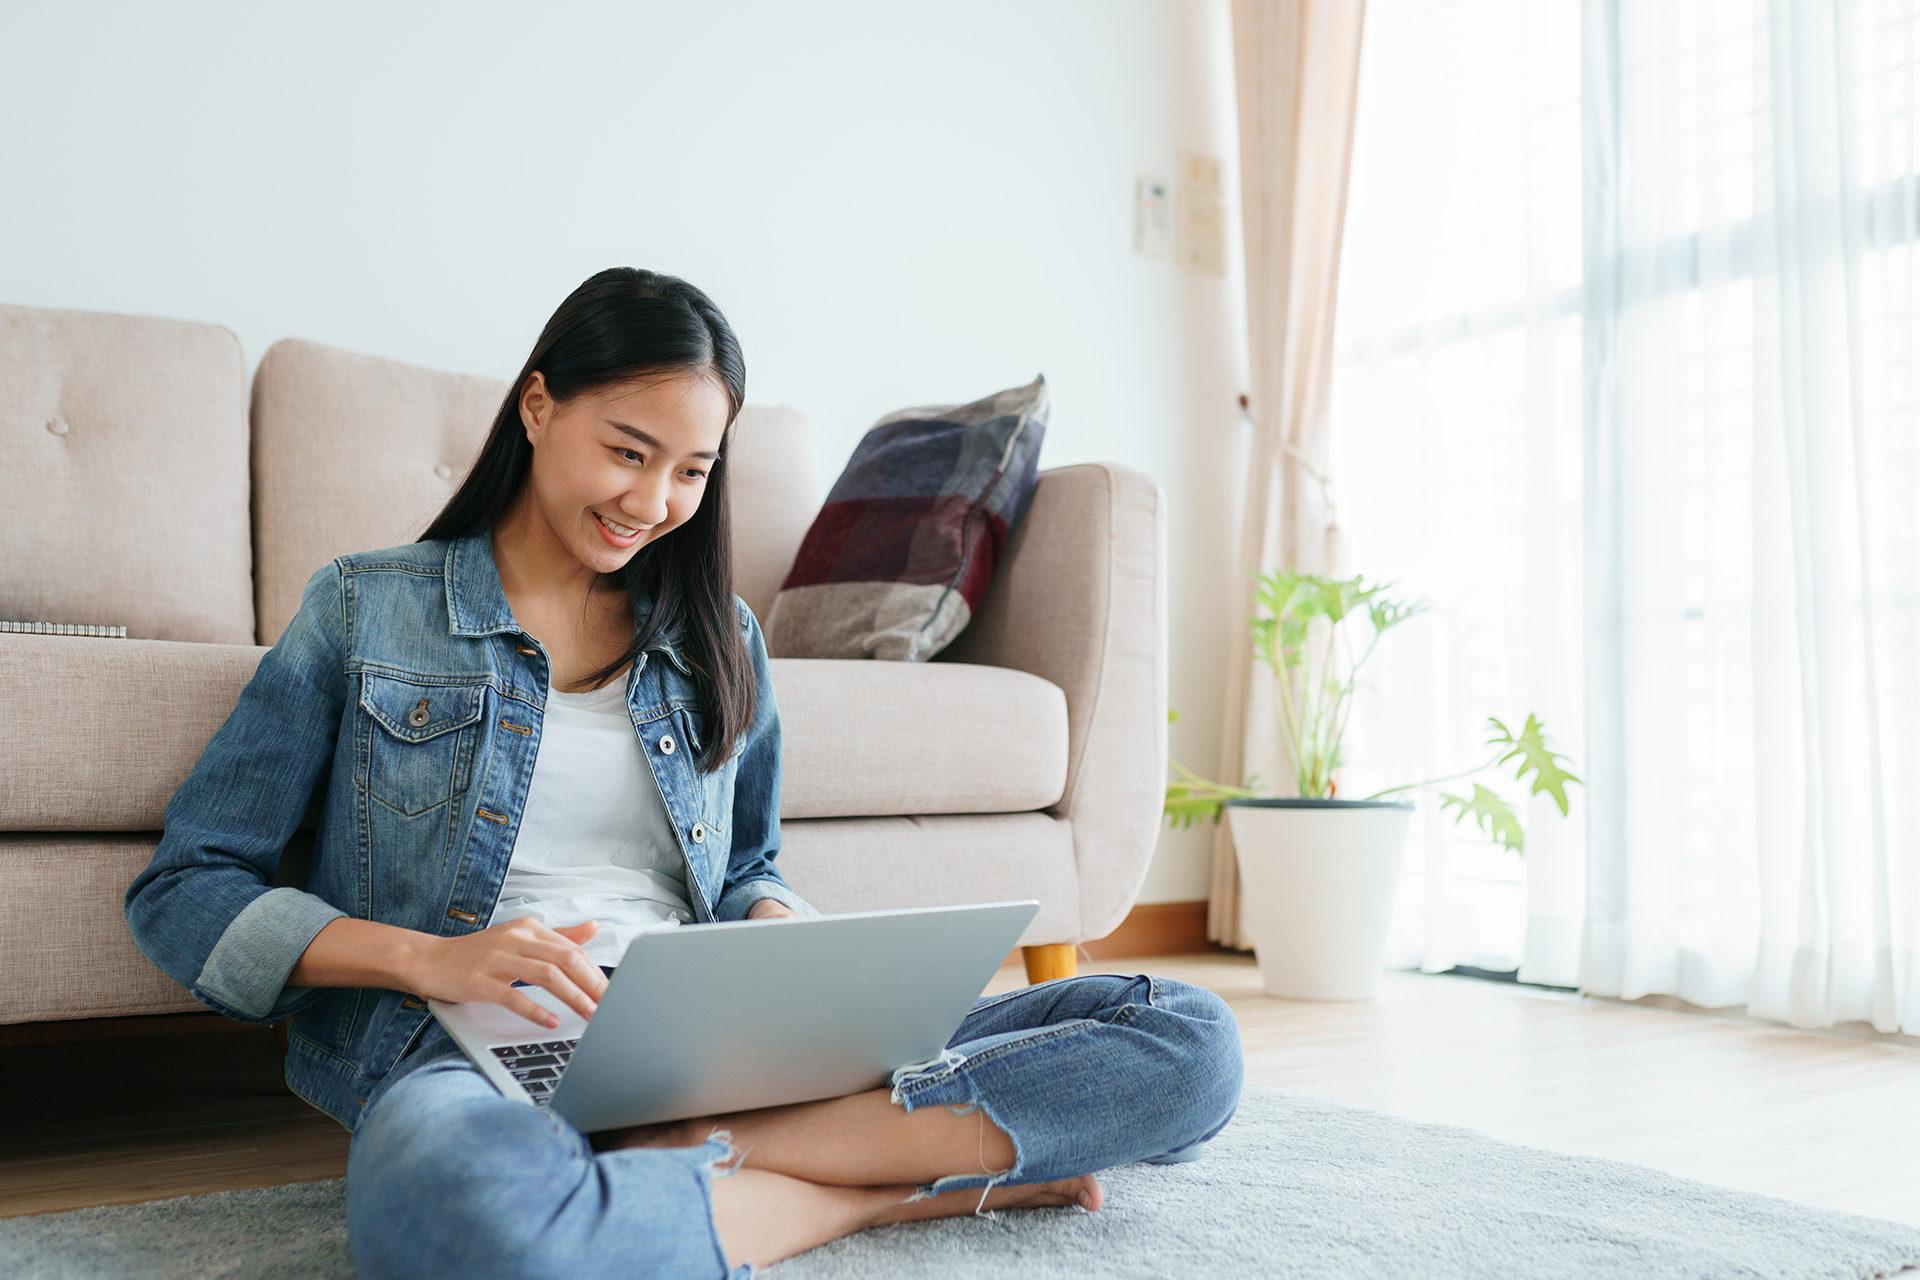 Asian girl wearing jeans using a laptop while sitting on the floor at home. Freelance girls are video conferencing with colleagues on social media. 概念工作在家和新常态